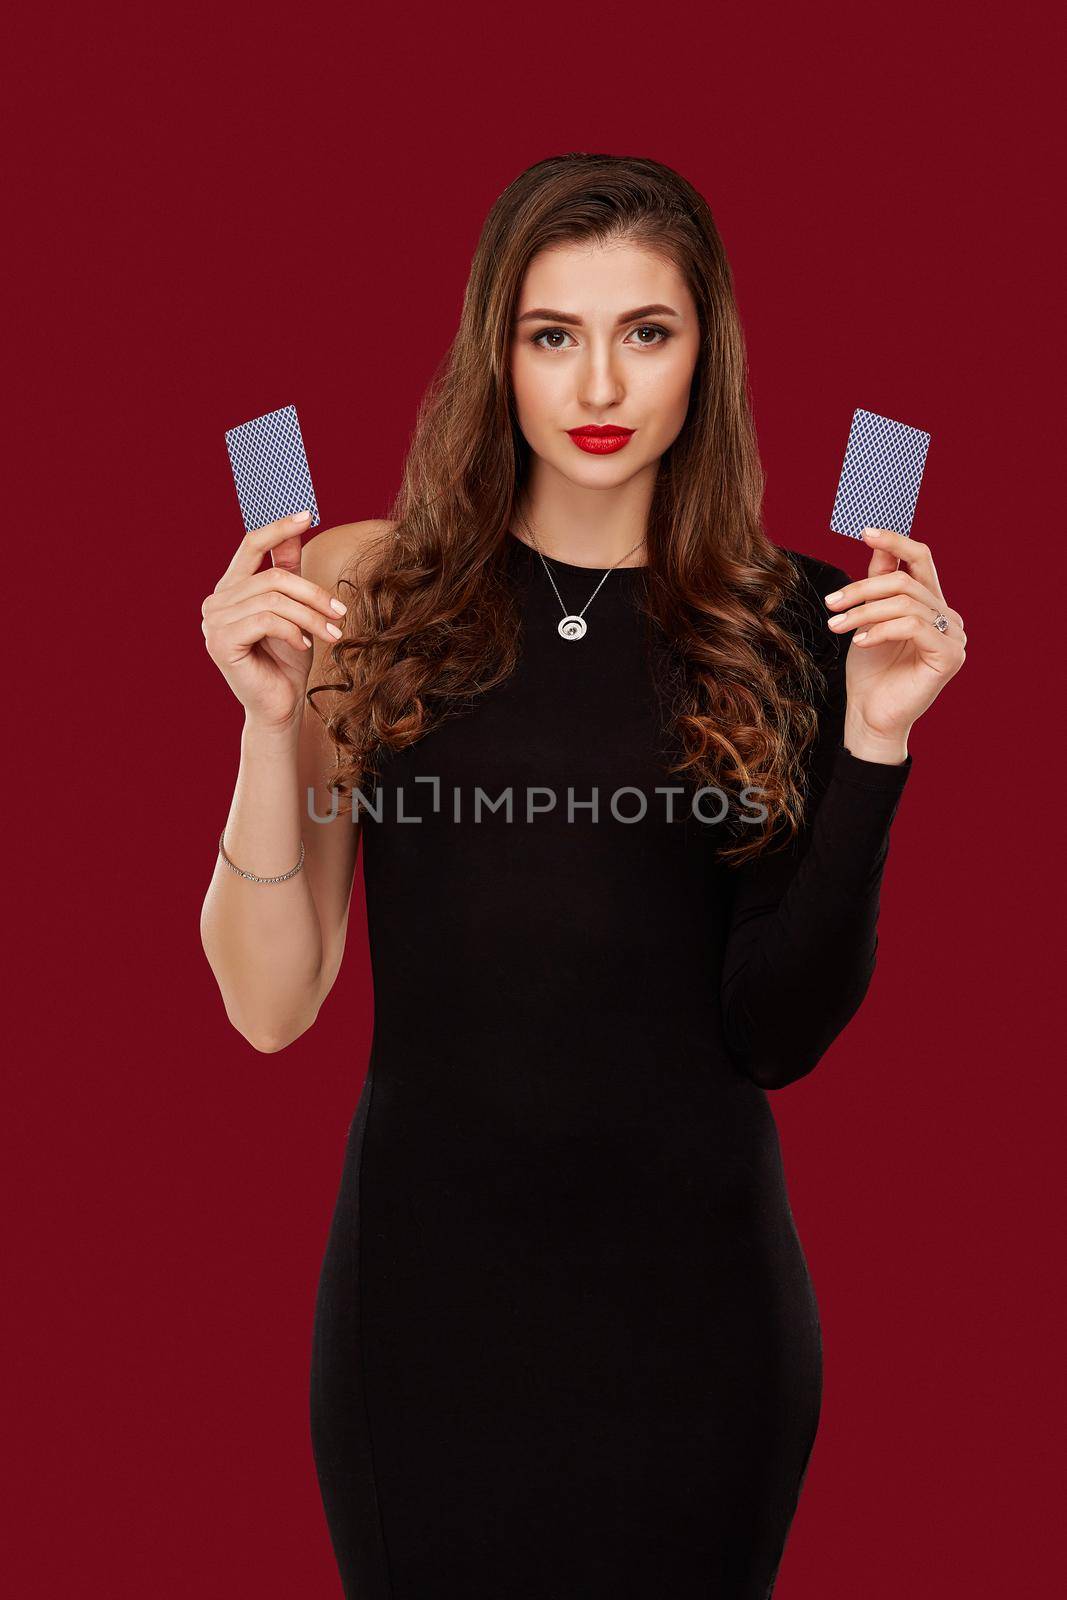 Beautiful caucasian woman in black dress with poker cards gambling in casino. Studio shot on red background. Poker. Two cards in hands